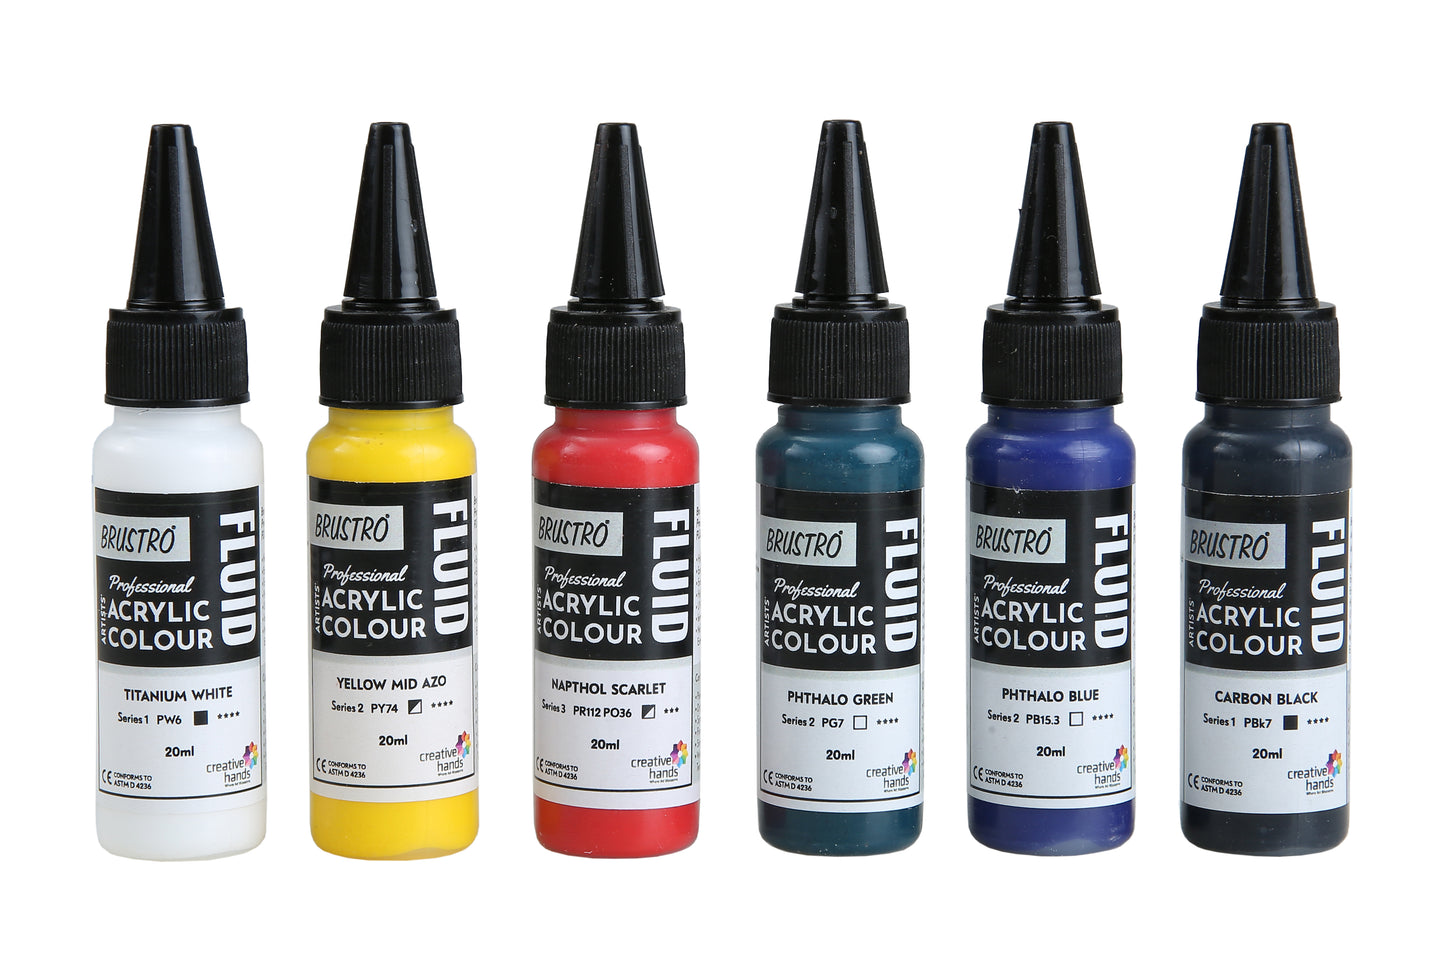 Brustro Professional Artists Fluid Acrylic 20 ml Primary Colours Pack of 5 + 1 Free (Titanium White, Yellow Mid AZO, Napthol Scarlet, Phthalo Blue, Phthalo Green and Carbon Black)